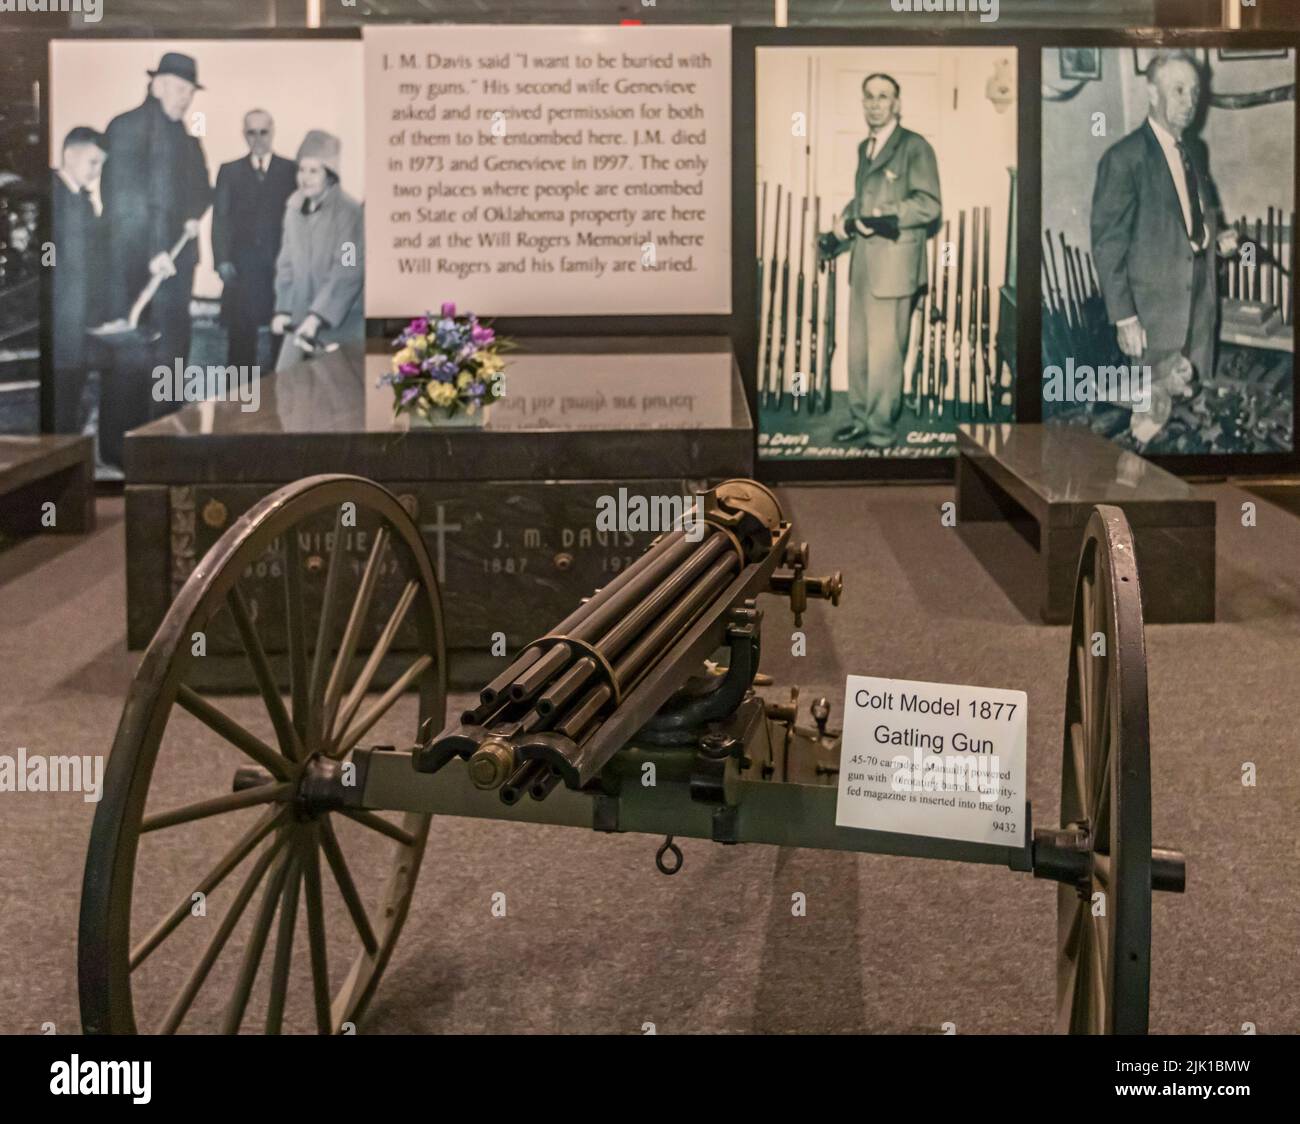 Claremore, Oklahoma - A Colt Model 1877 Gatling Gun displayed next to the tomb of J.M. Davis at the Davis Arms & Historical Museum. Davis, who collect Stock Photo